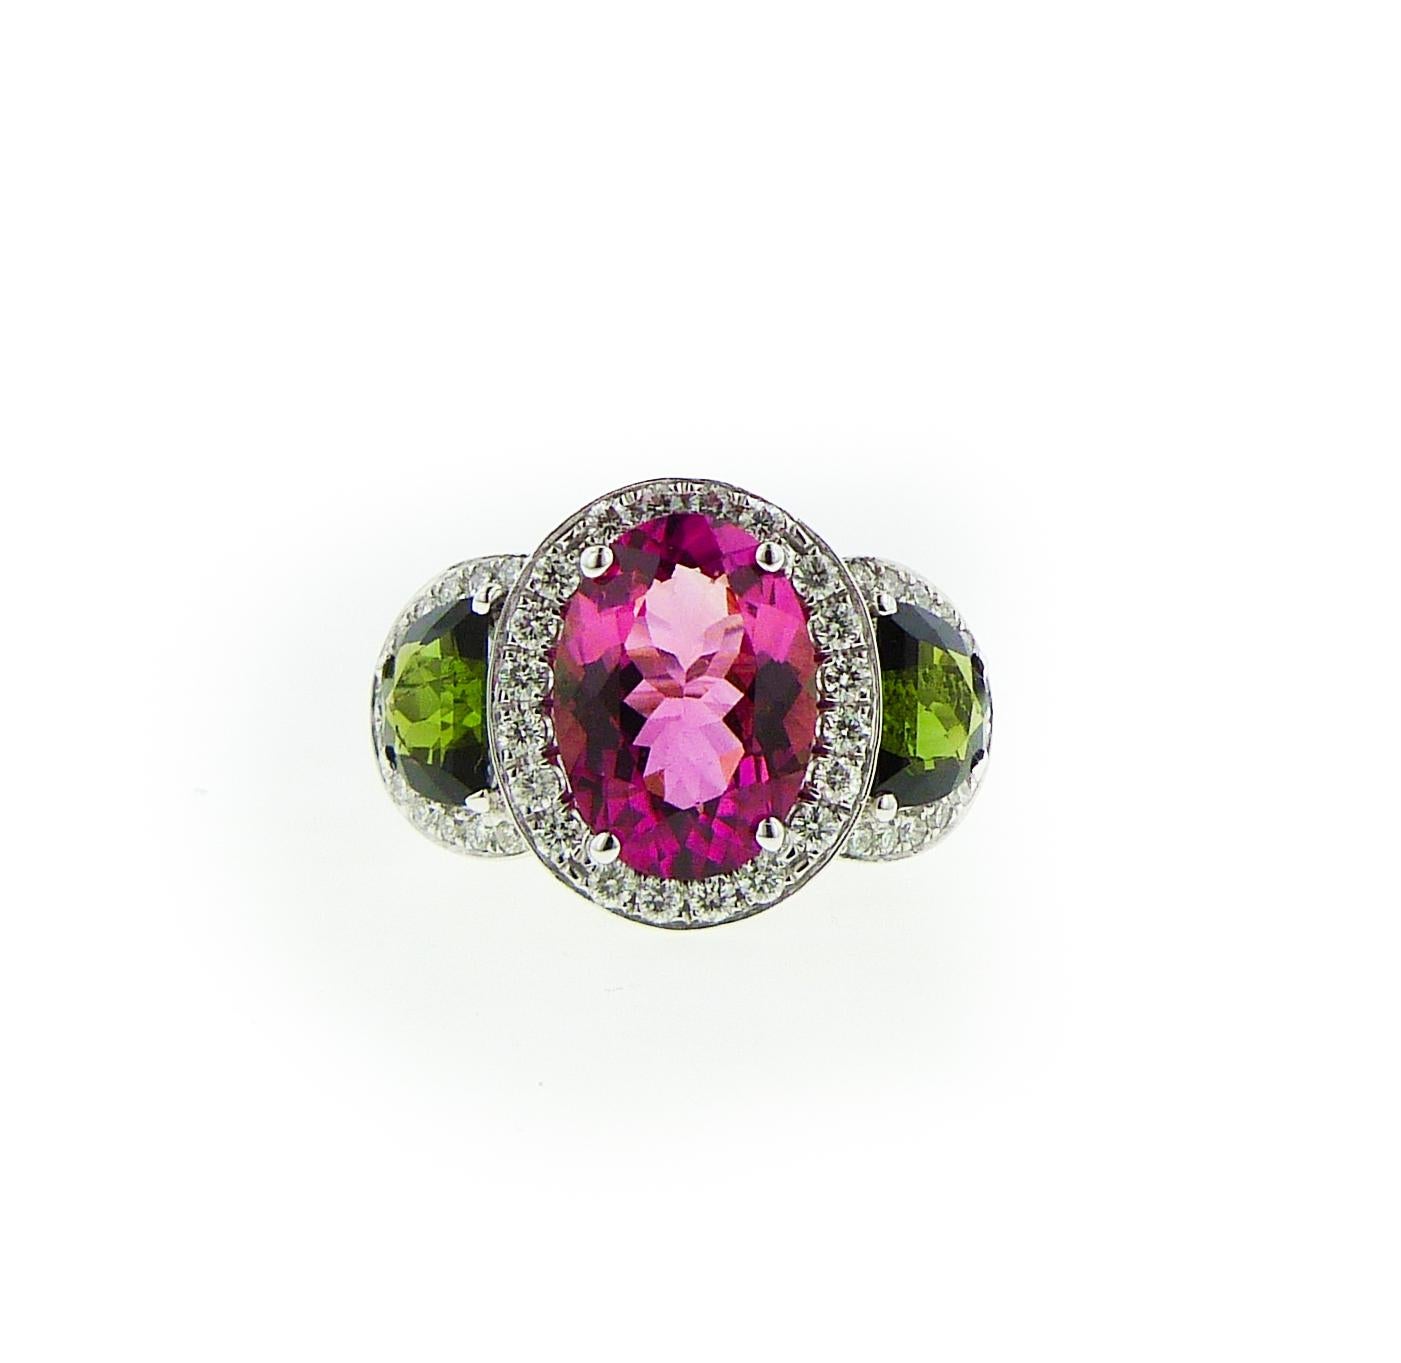 Modern Diana M. 18 kt white gold tourmaline and diamond ring featuring a 5.62 ct oval For Sale